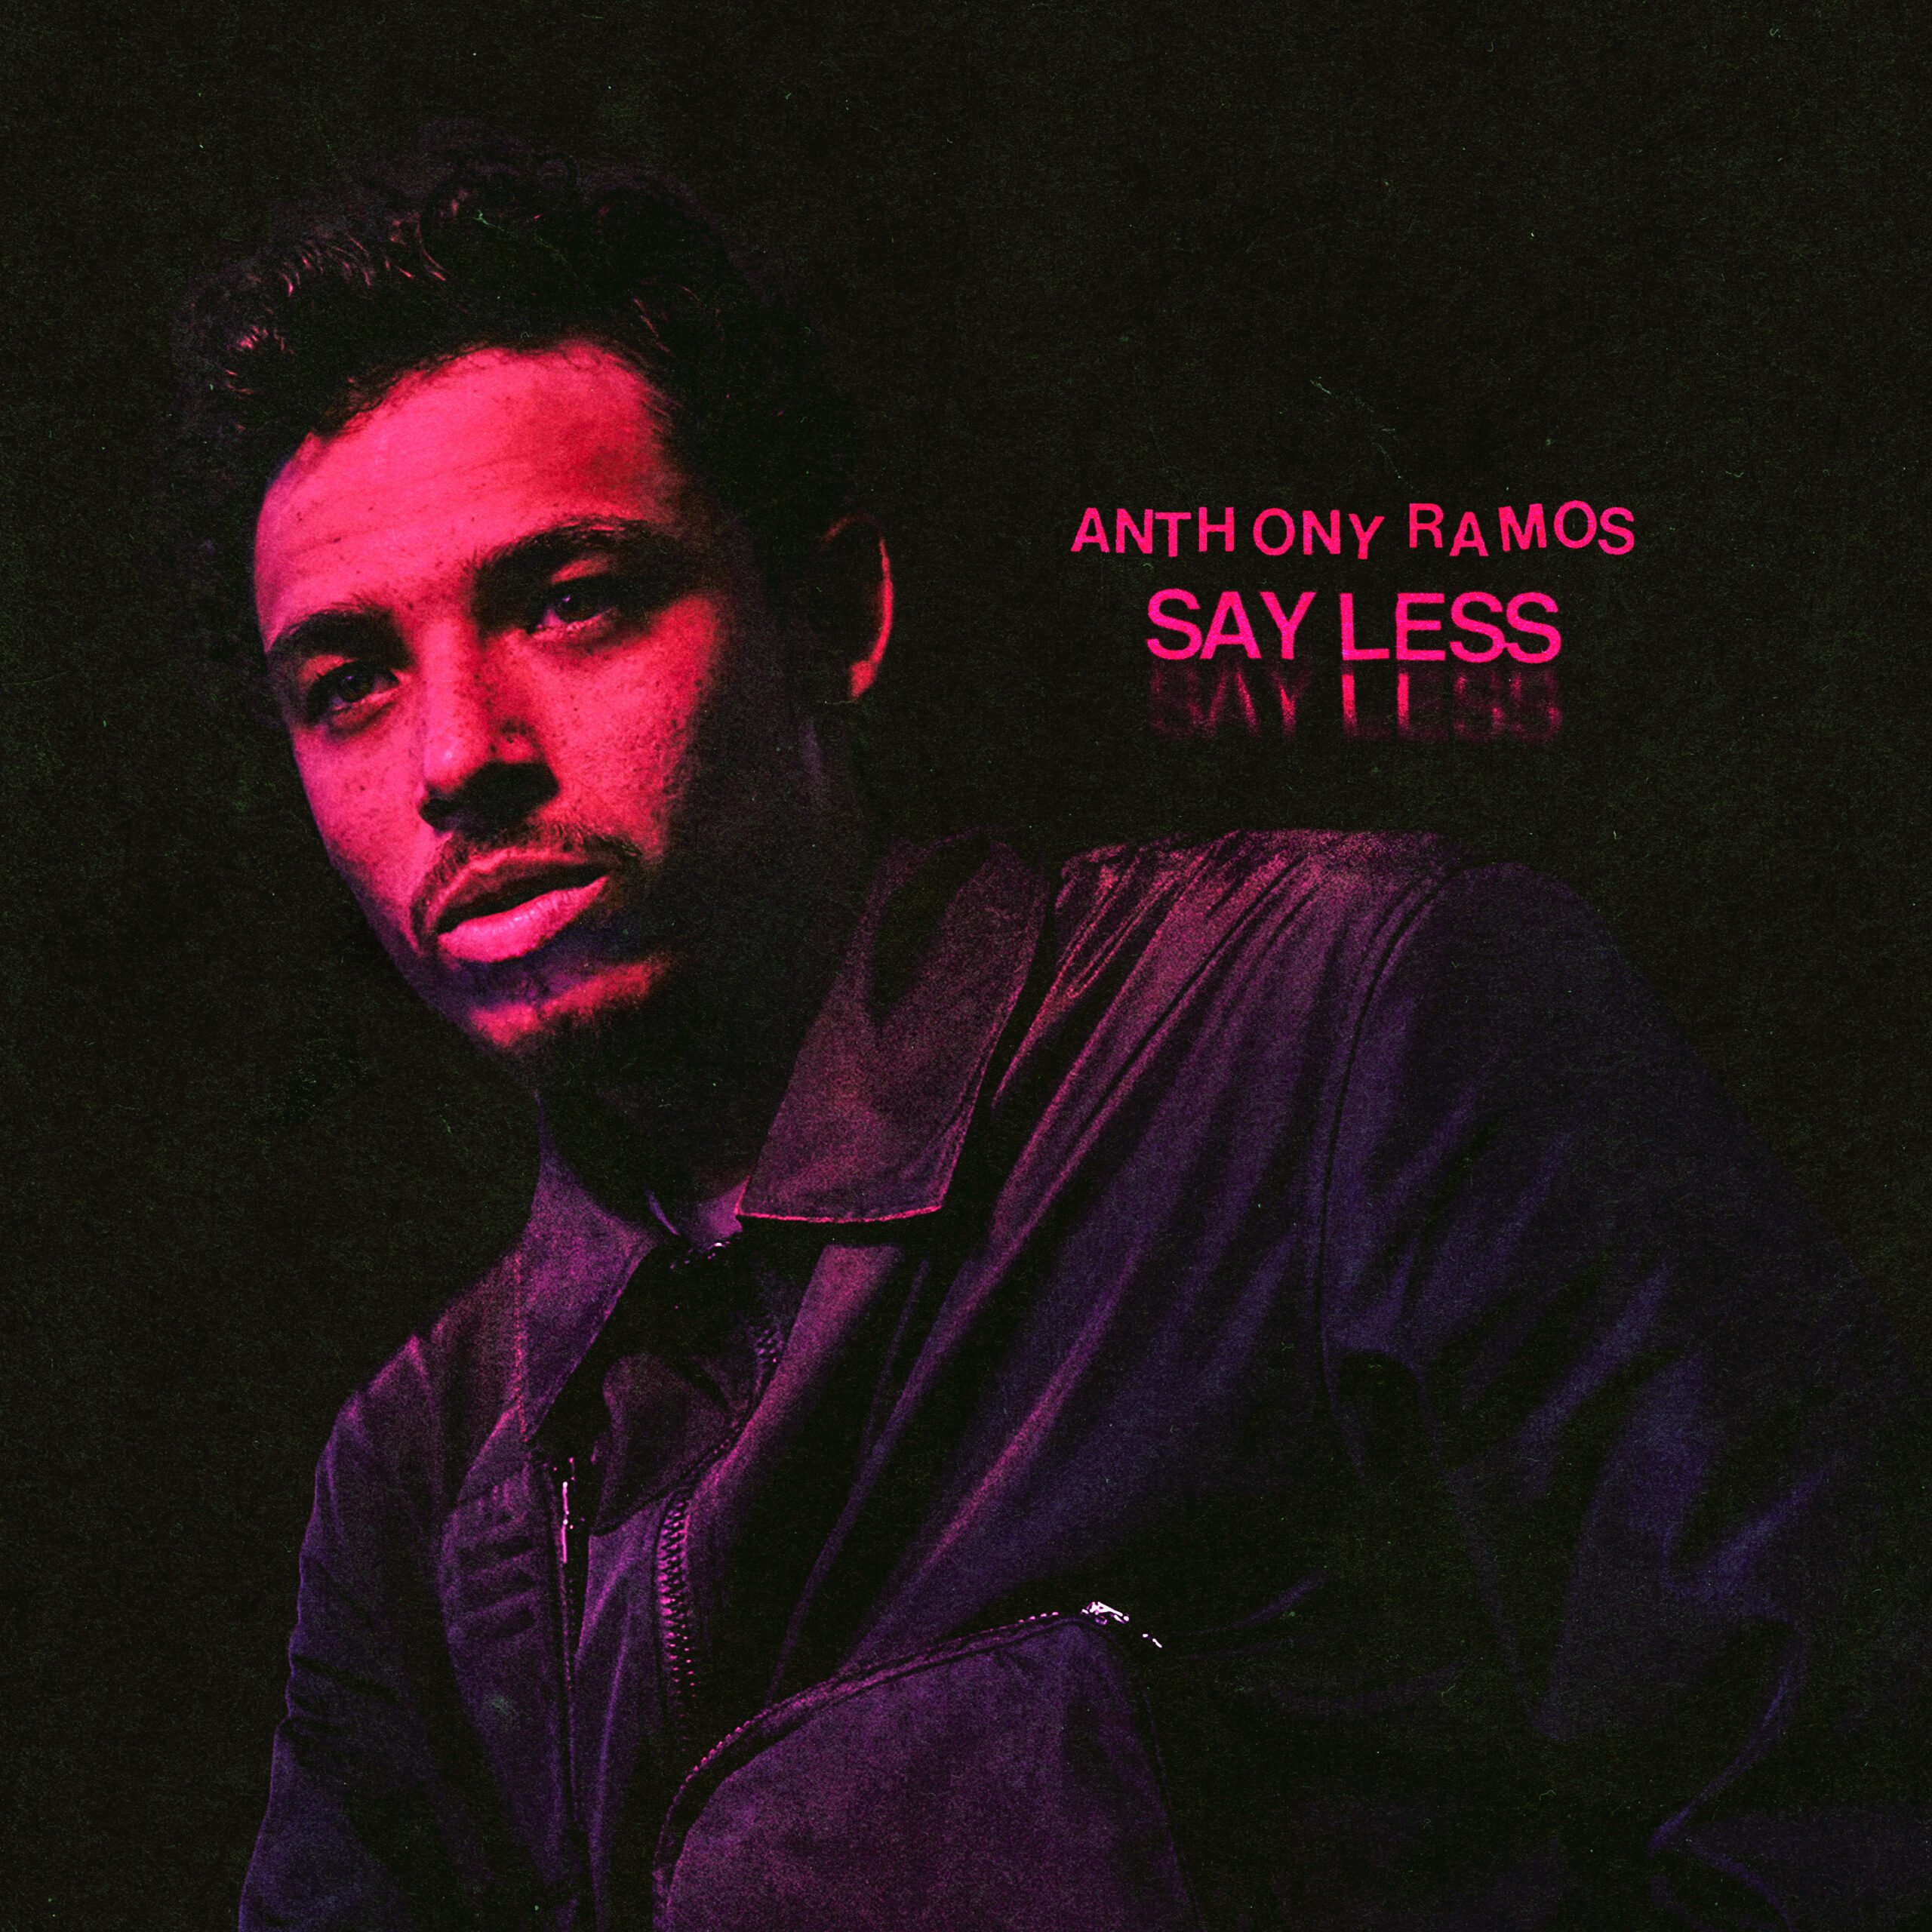 Anthony Ramos of Republic Records "Say Less" Artwork uploaded by Danielle Gonzalez for use by 360 Magazine